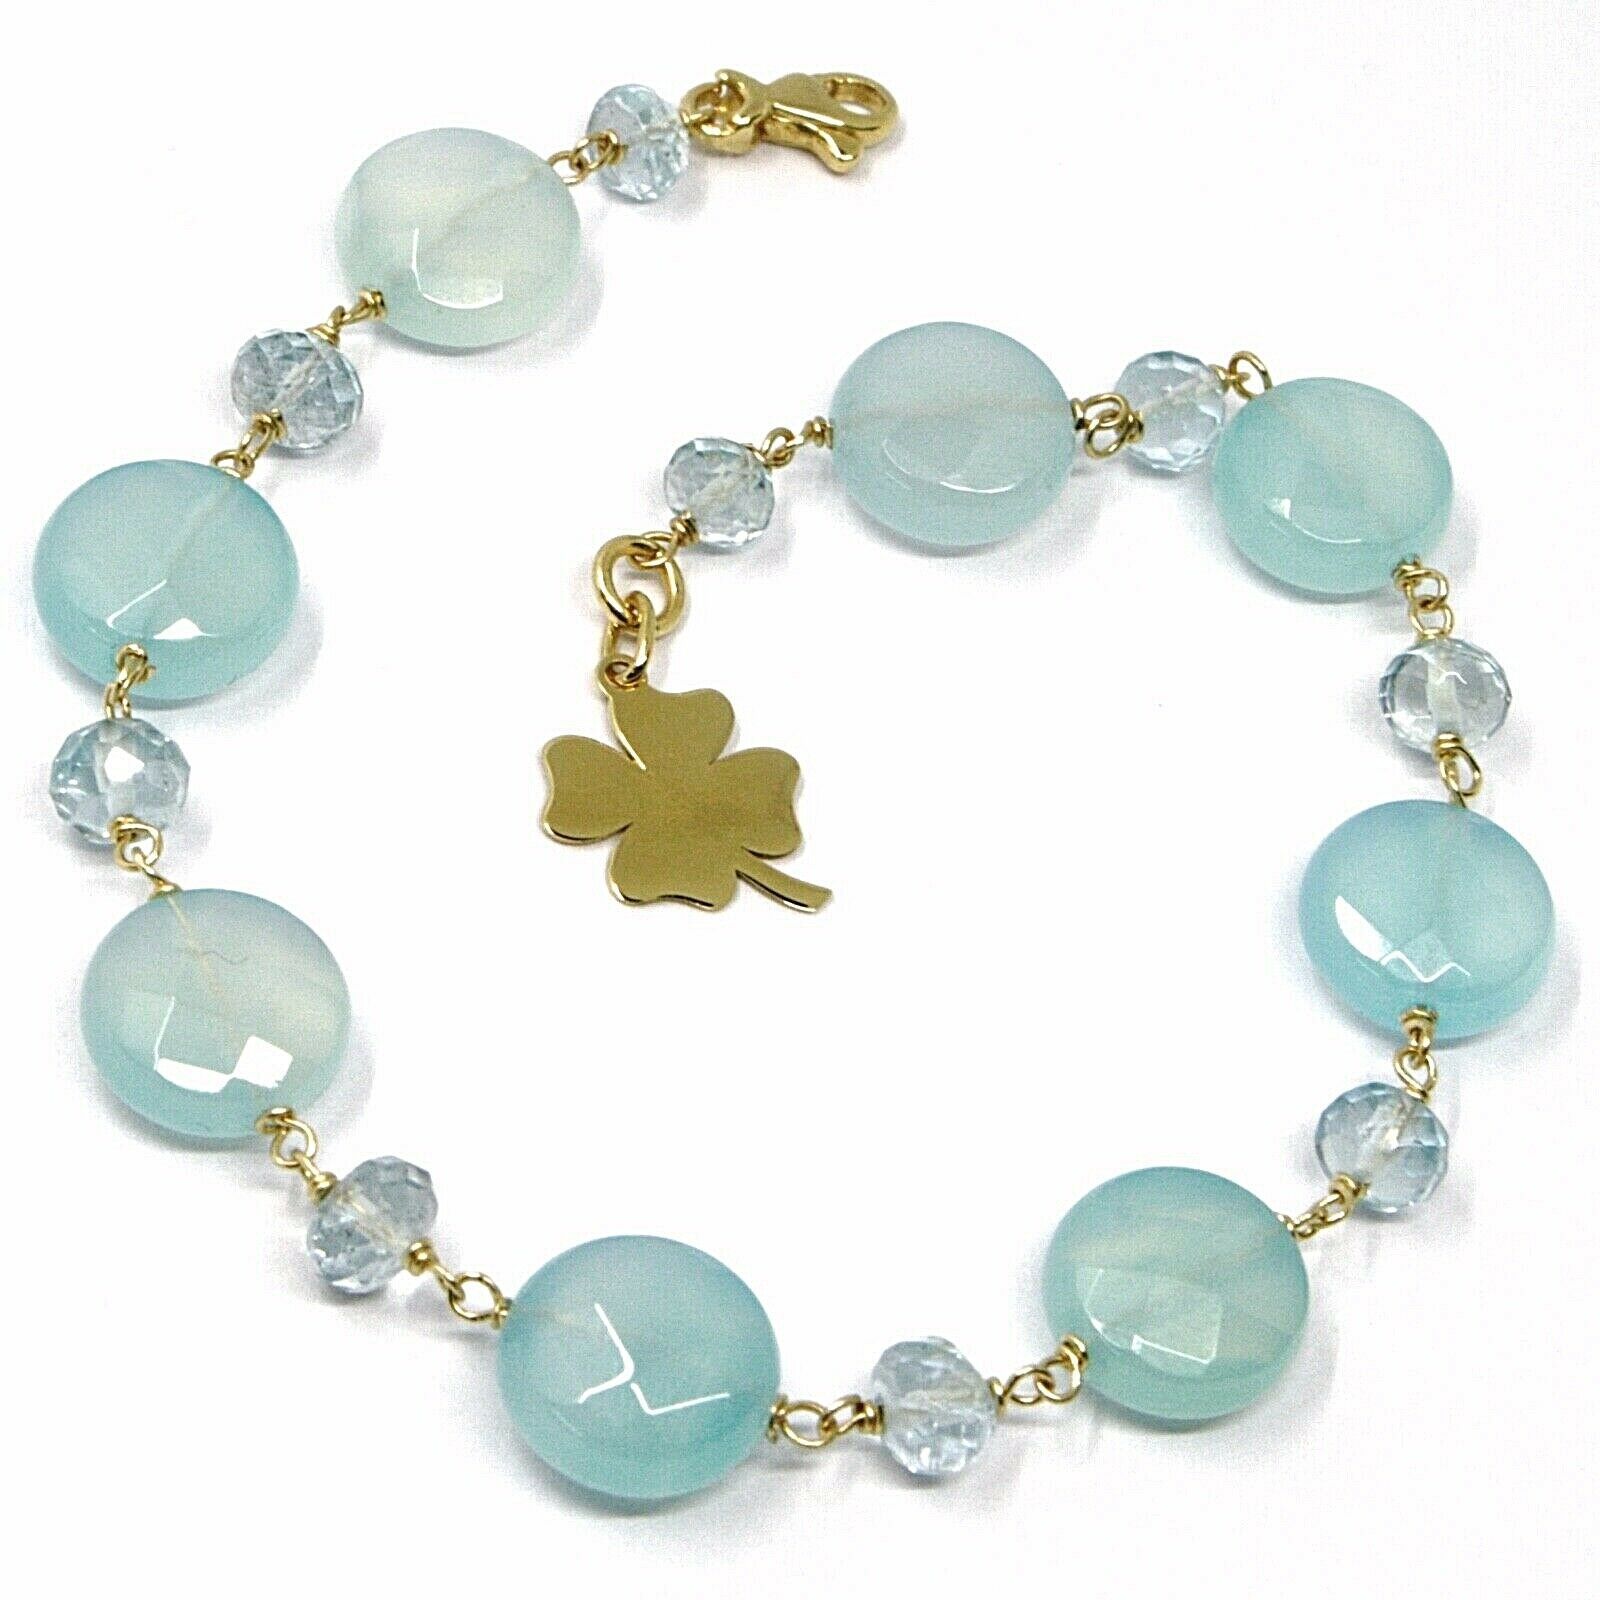 Primary image for 18K YELLOW GOLD BRACELET OVAL FACETED AQUAMARINE AGATE, FOUR LEAF CLOVER PENDANT